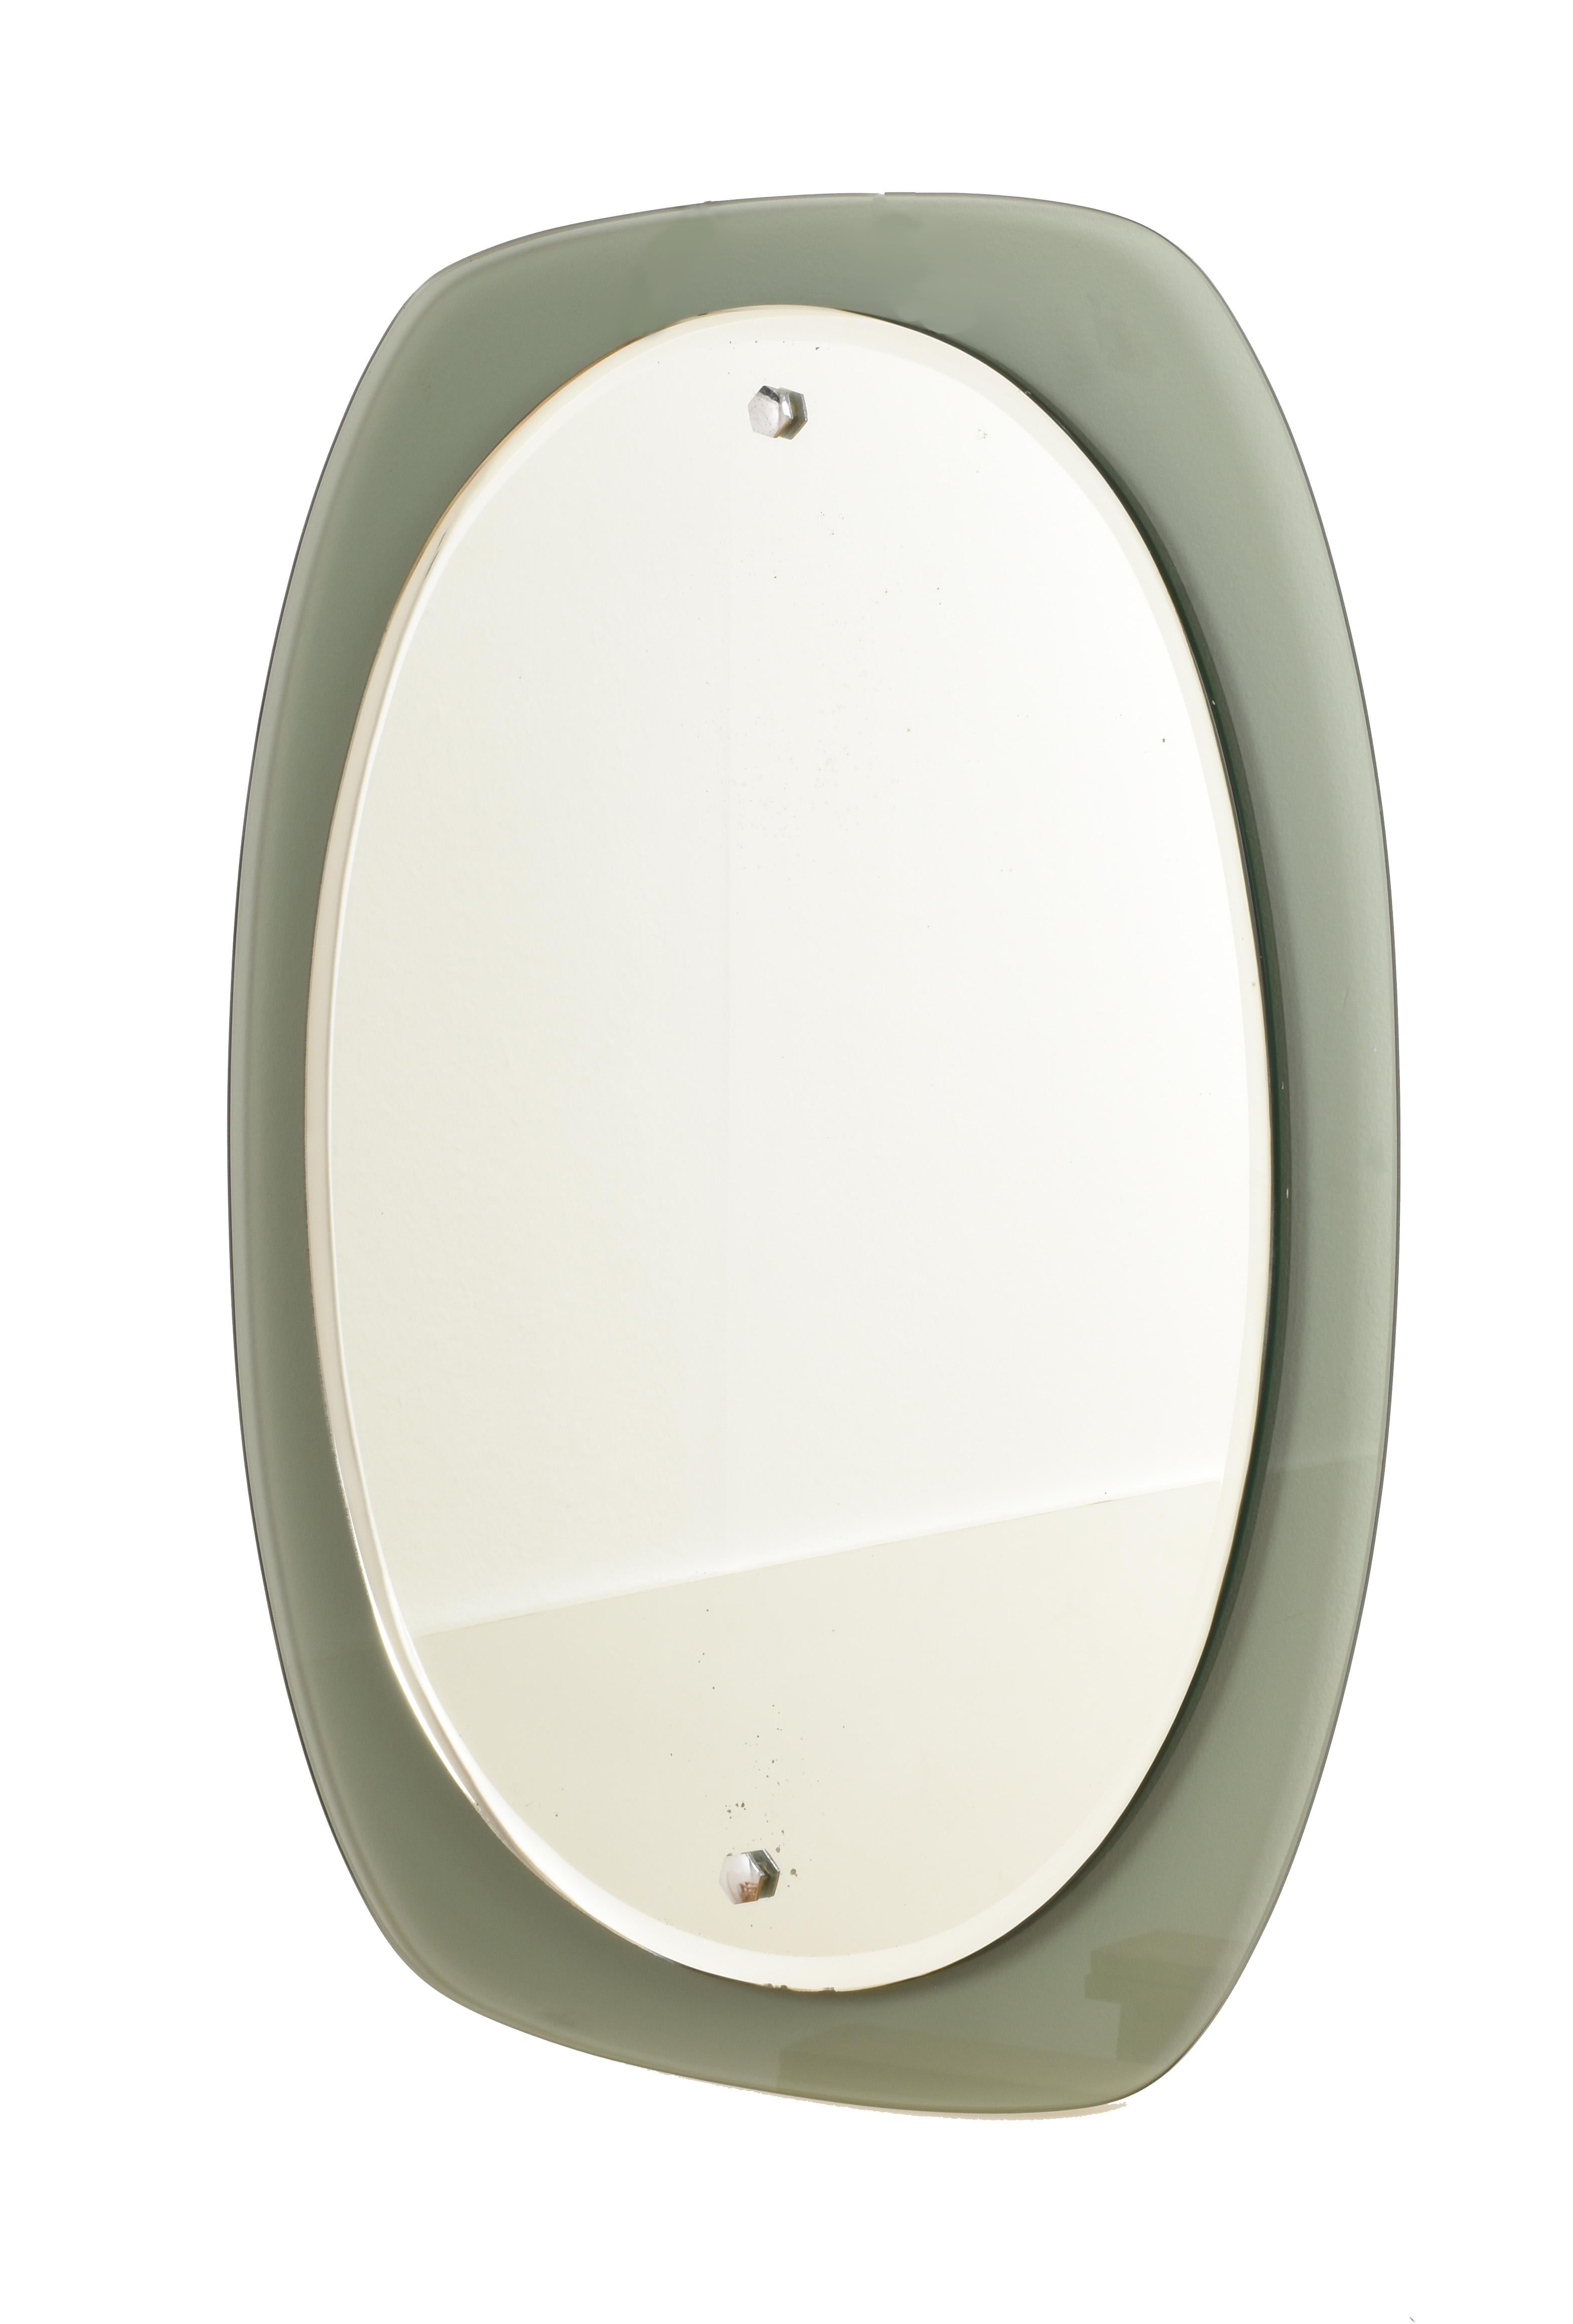 Mid-Century Modern Italian Wall Mirror with Frame, Italy, 1960s, Attributed to Veca